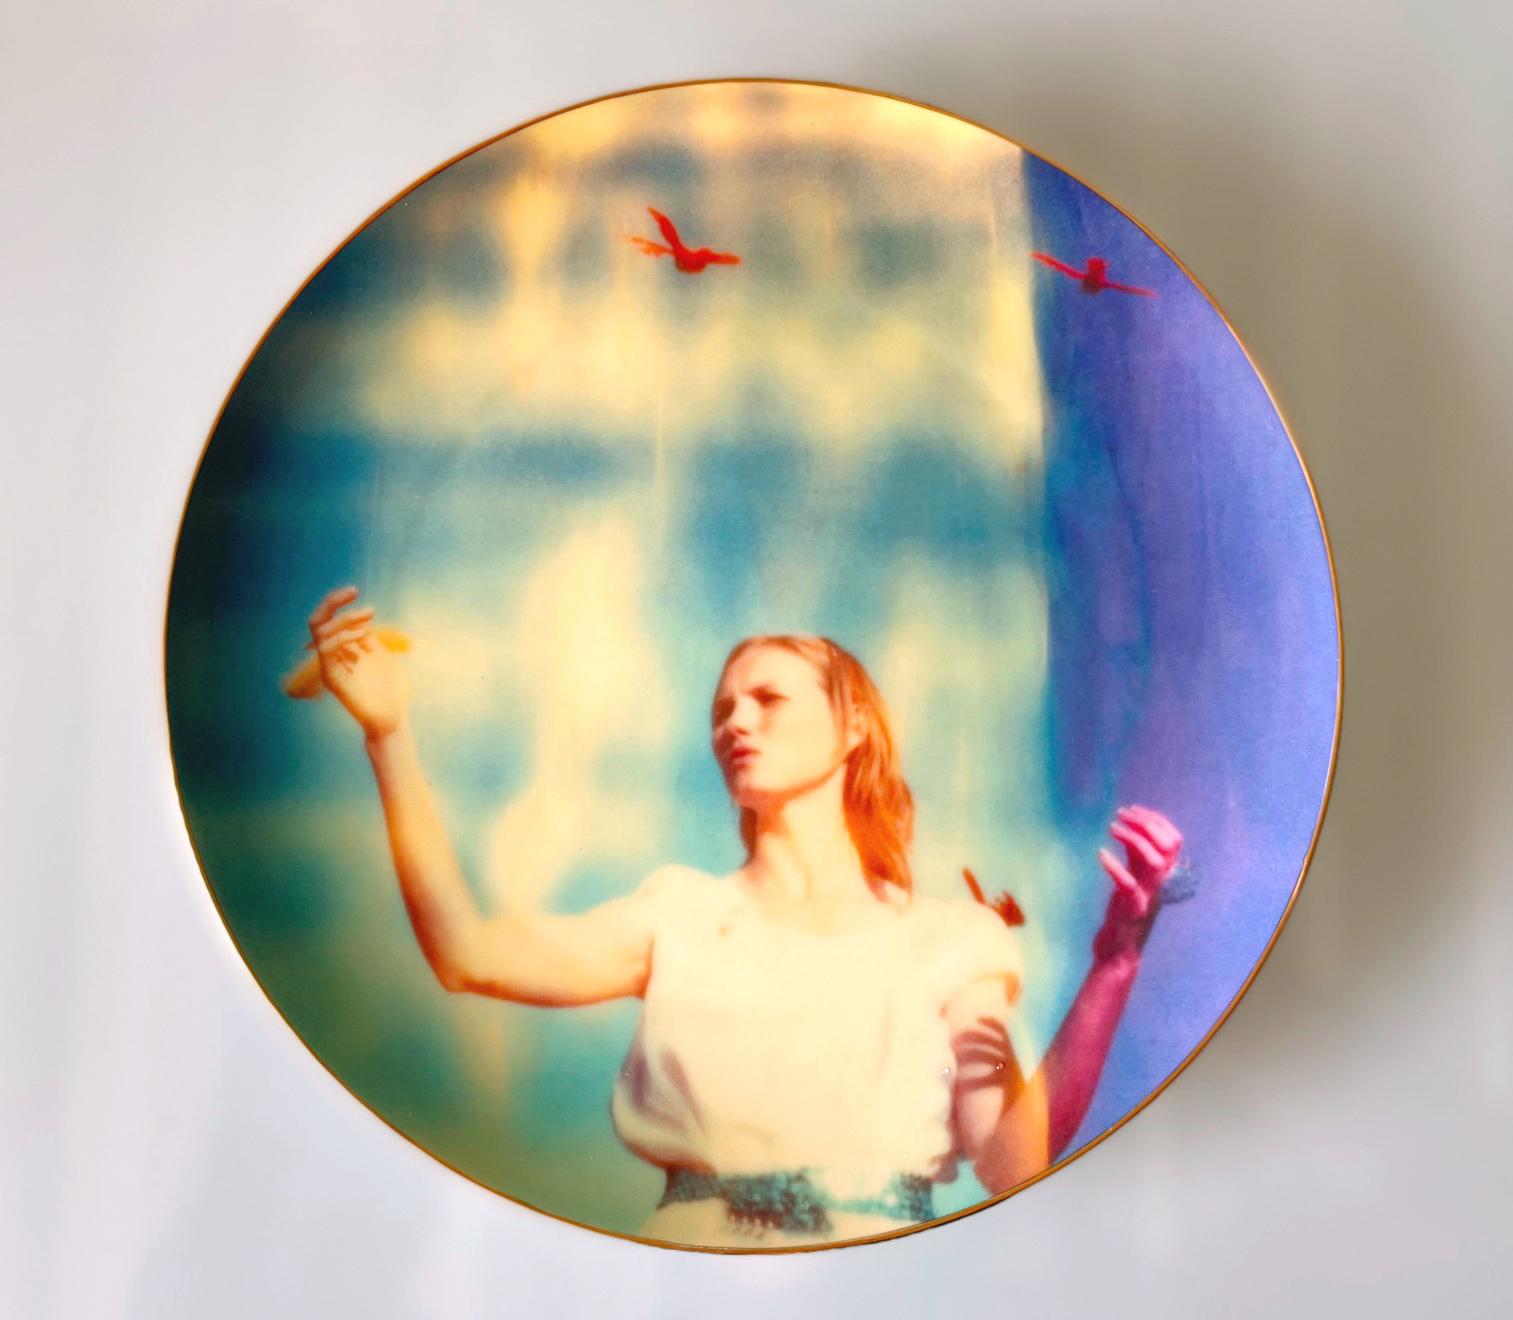 Stefanie Schneider's Coupe Plate 'Haley and the Birds', 2021

with 24-carat hand painted golden rim. 
Screen print based on a Polaroid. 
Edition of 500. 
Plate size 26.67 cm / 10.5 inch. 
Signed and numbered on verso. 
